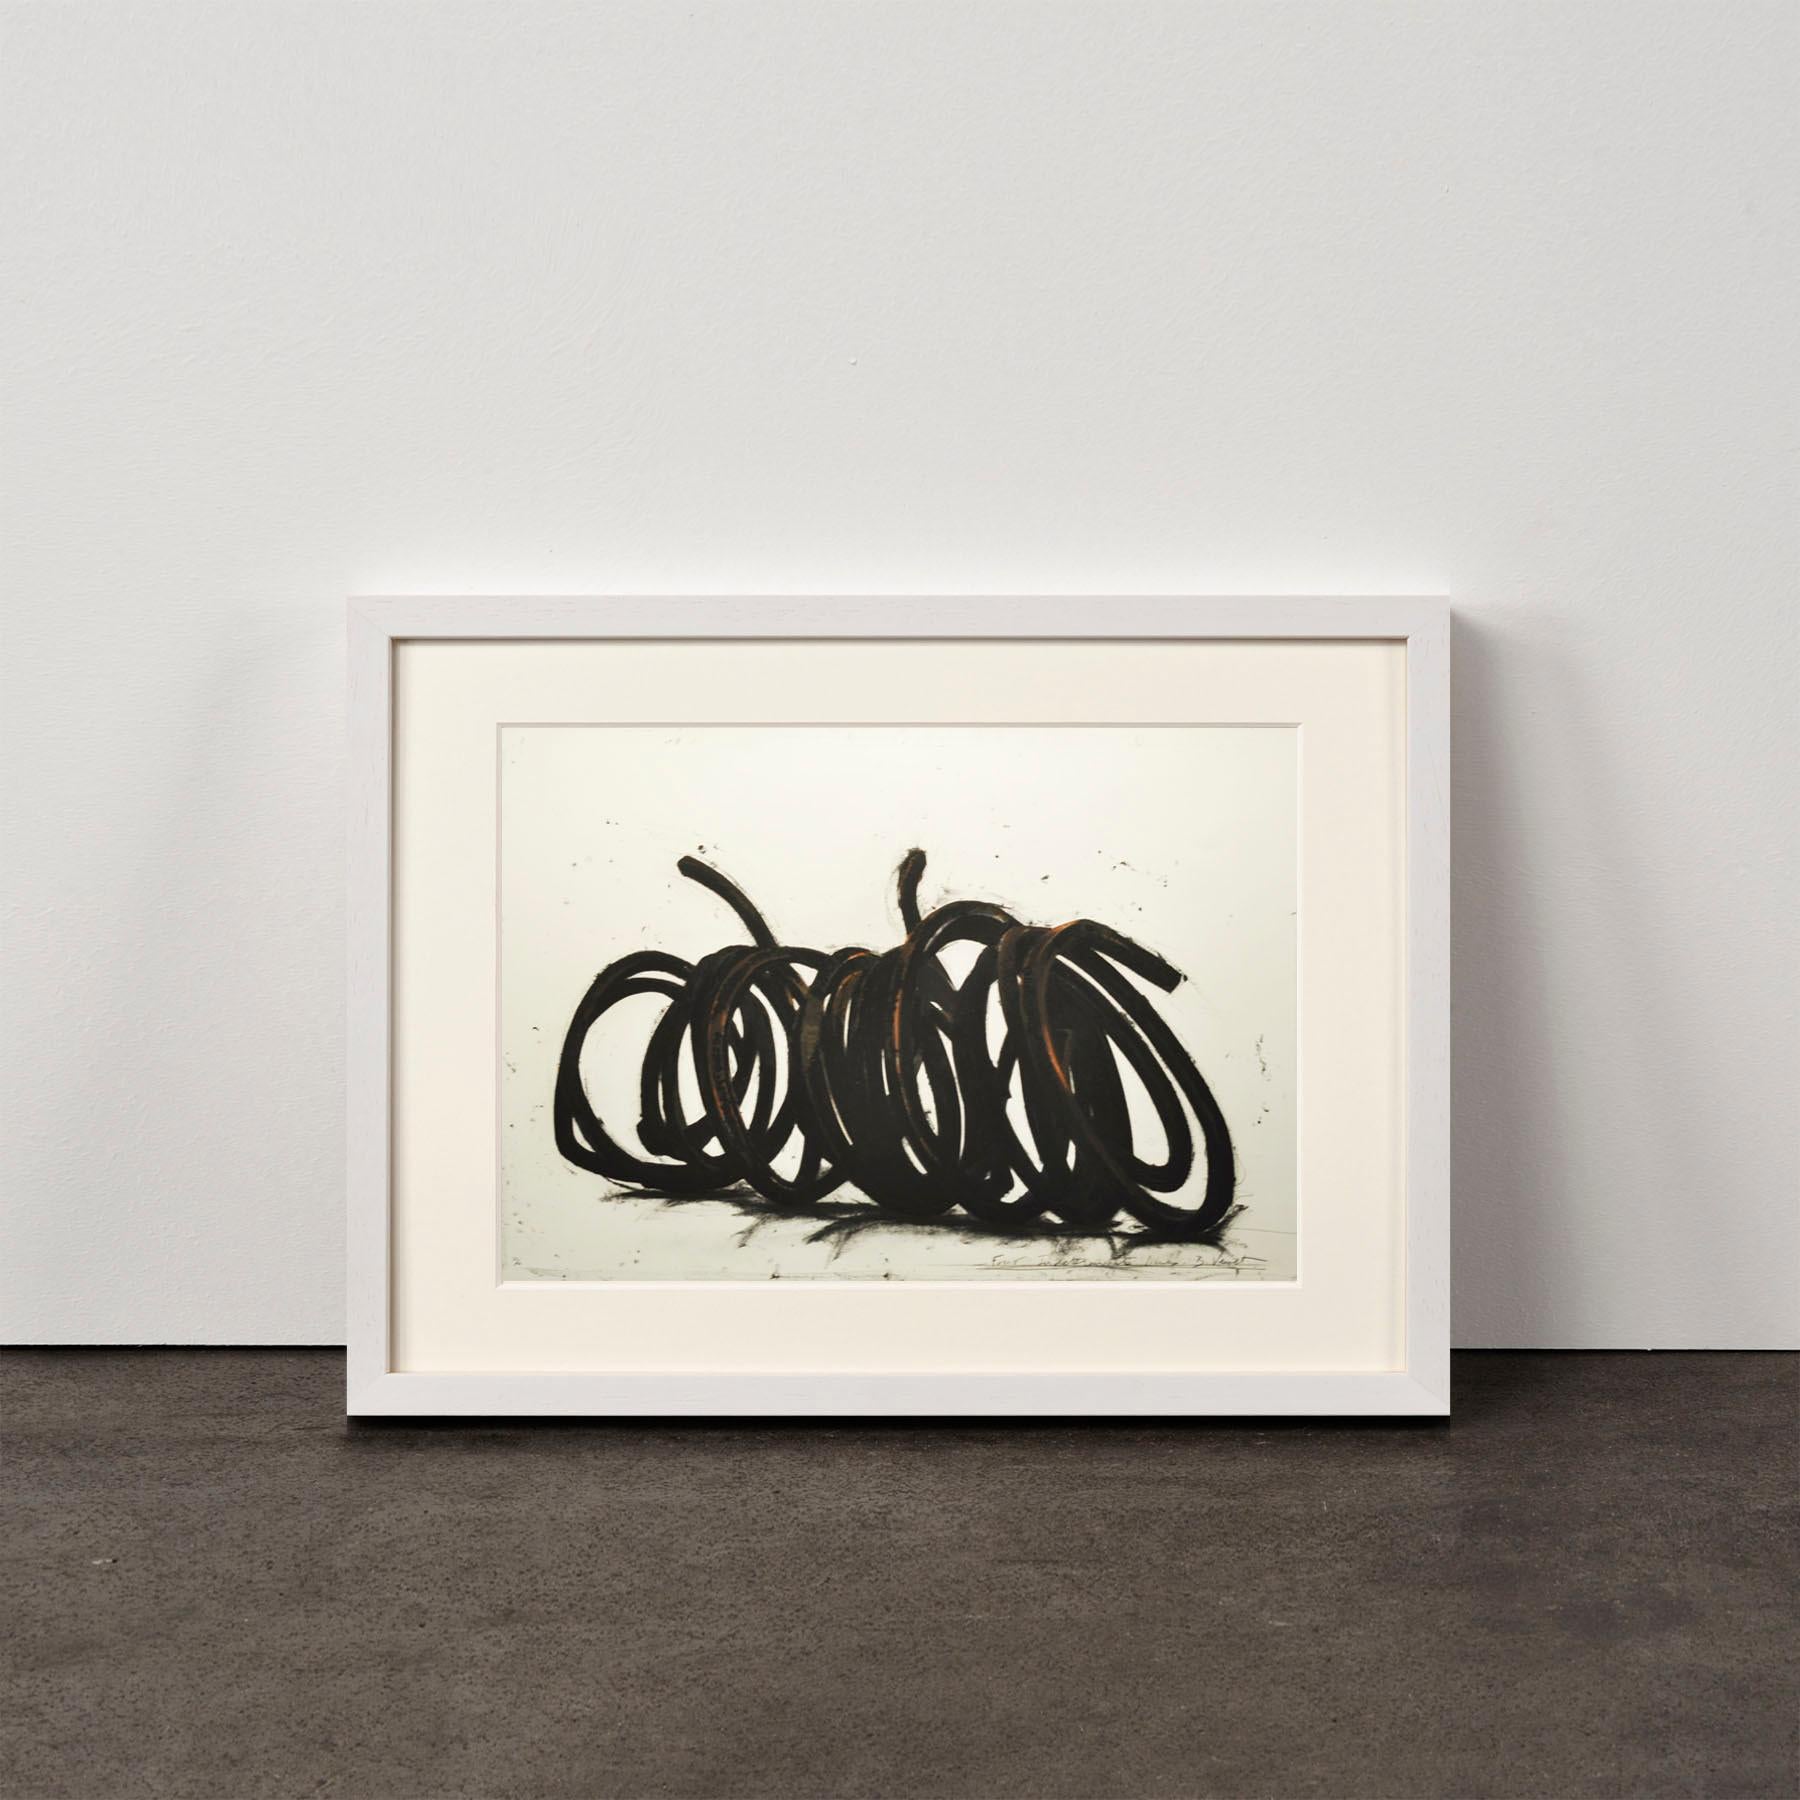 Four Indeterminate Lines - Contemporary, 21st Century, Etching, Black and White - Print by Bernar Venet